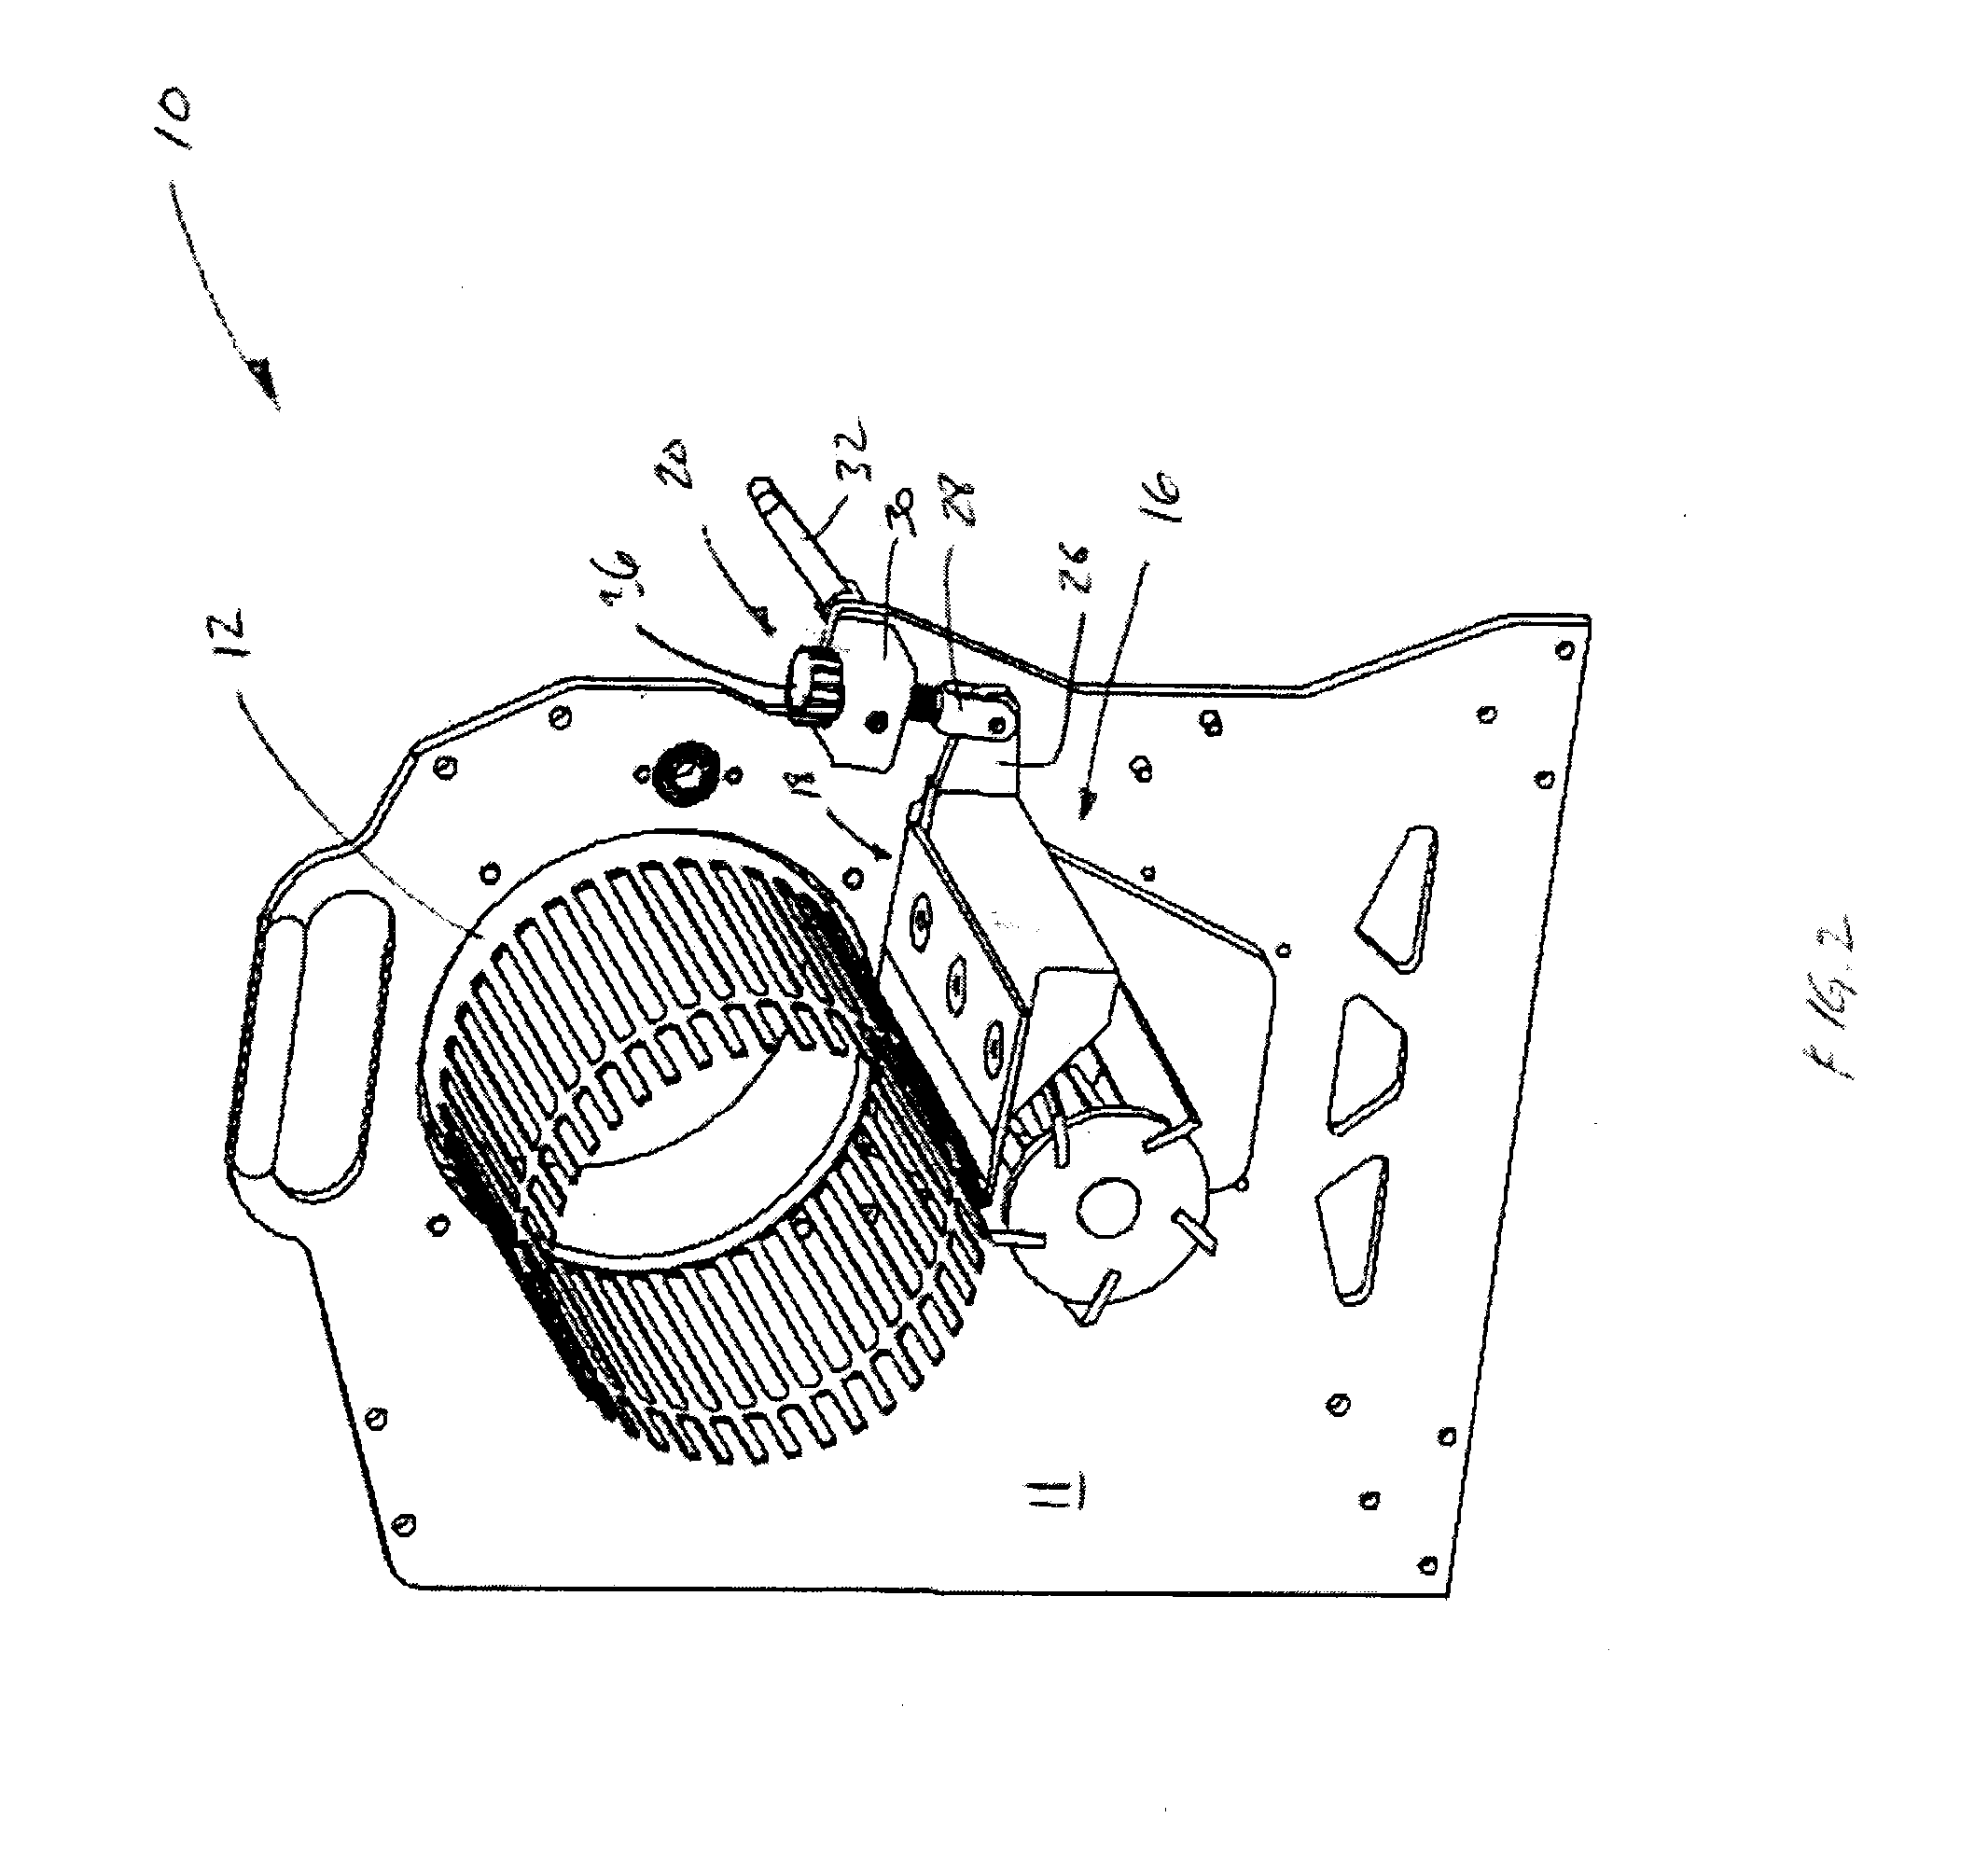 Blade mechanism for a plant material trimming device